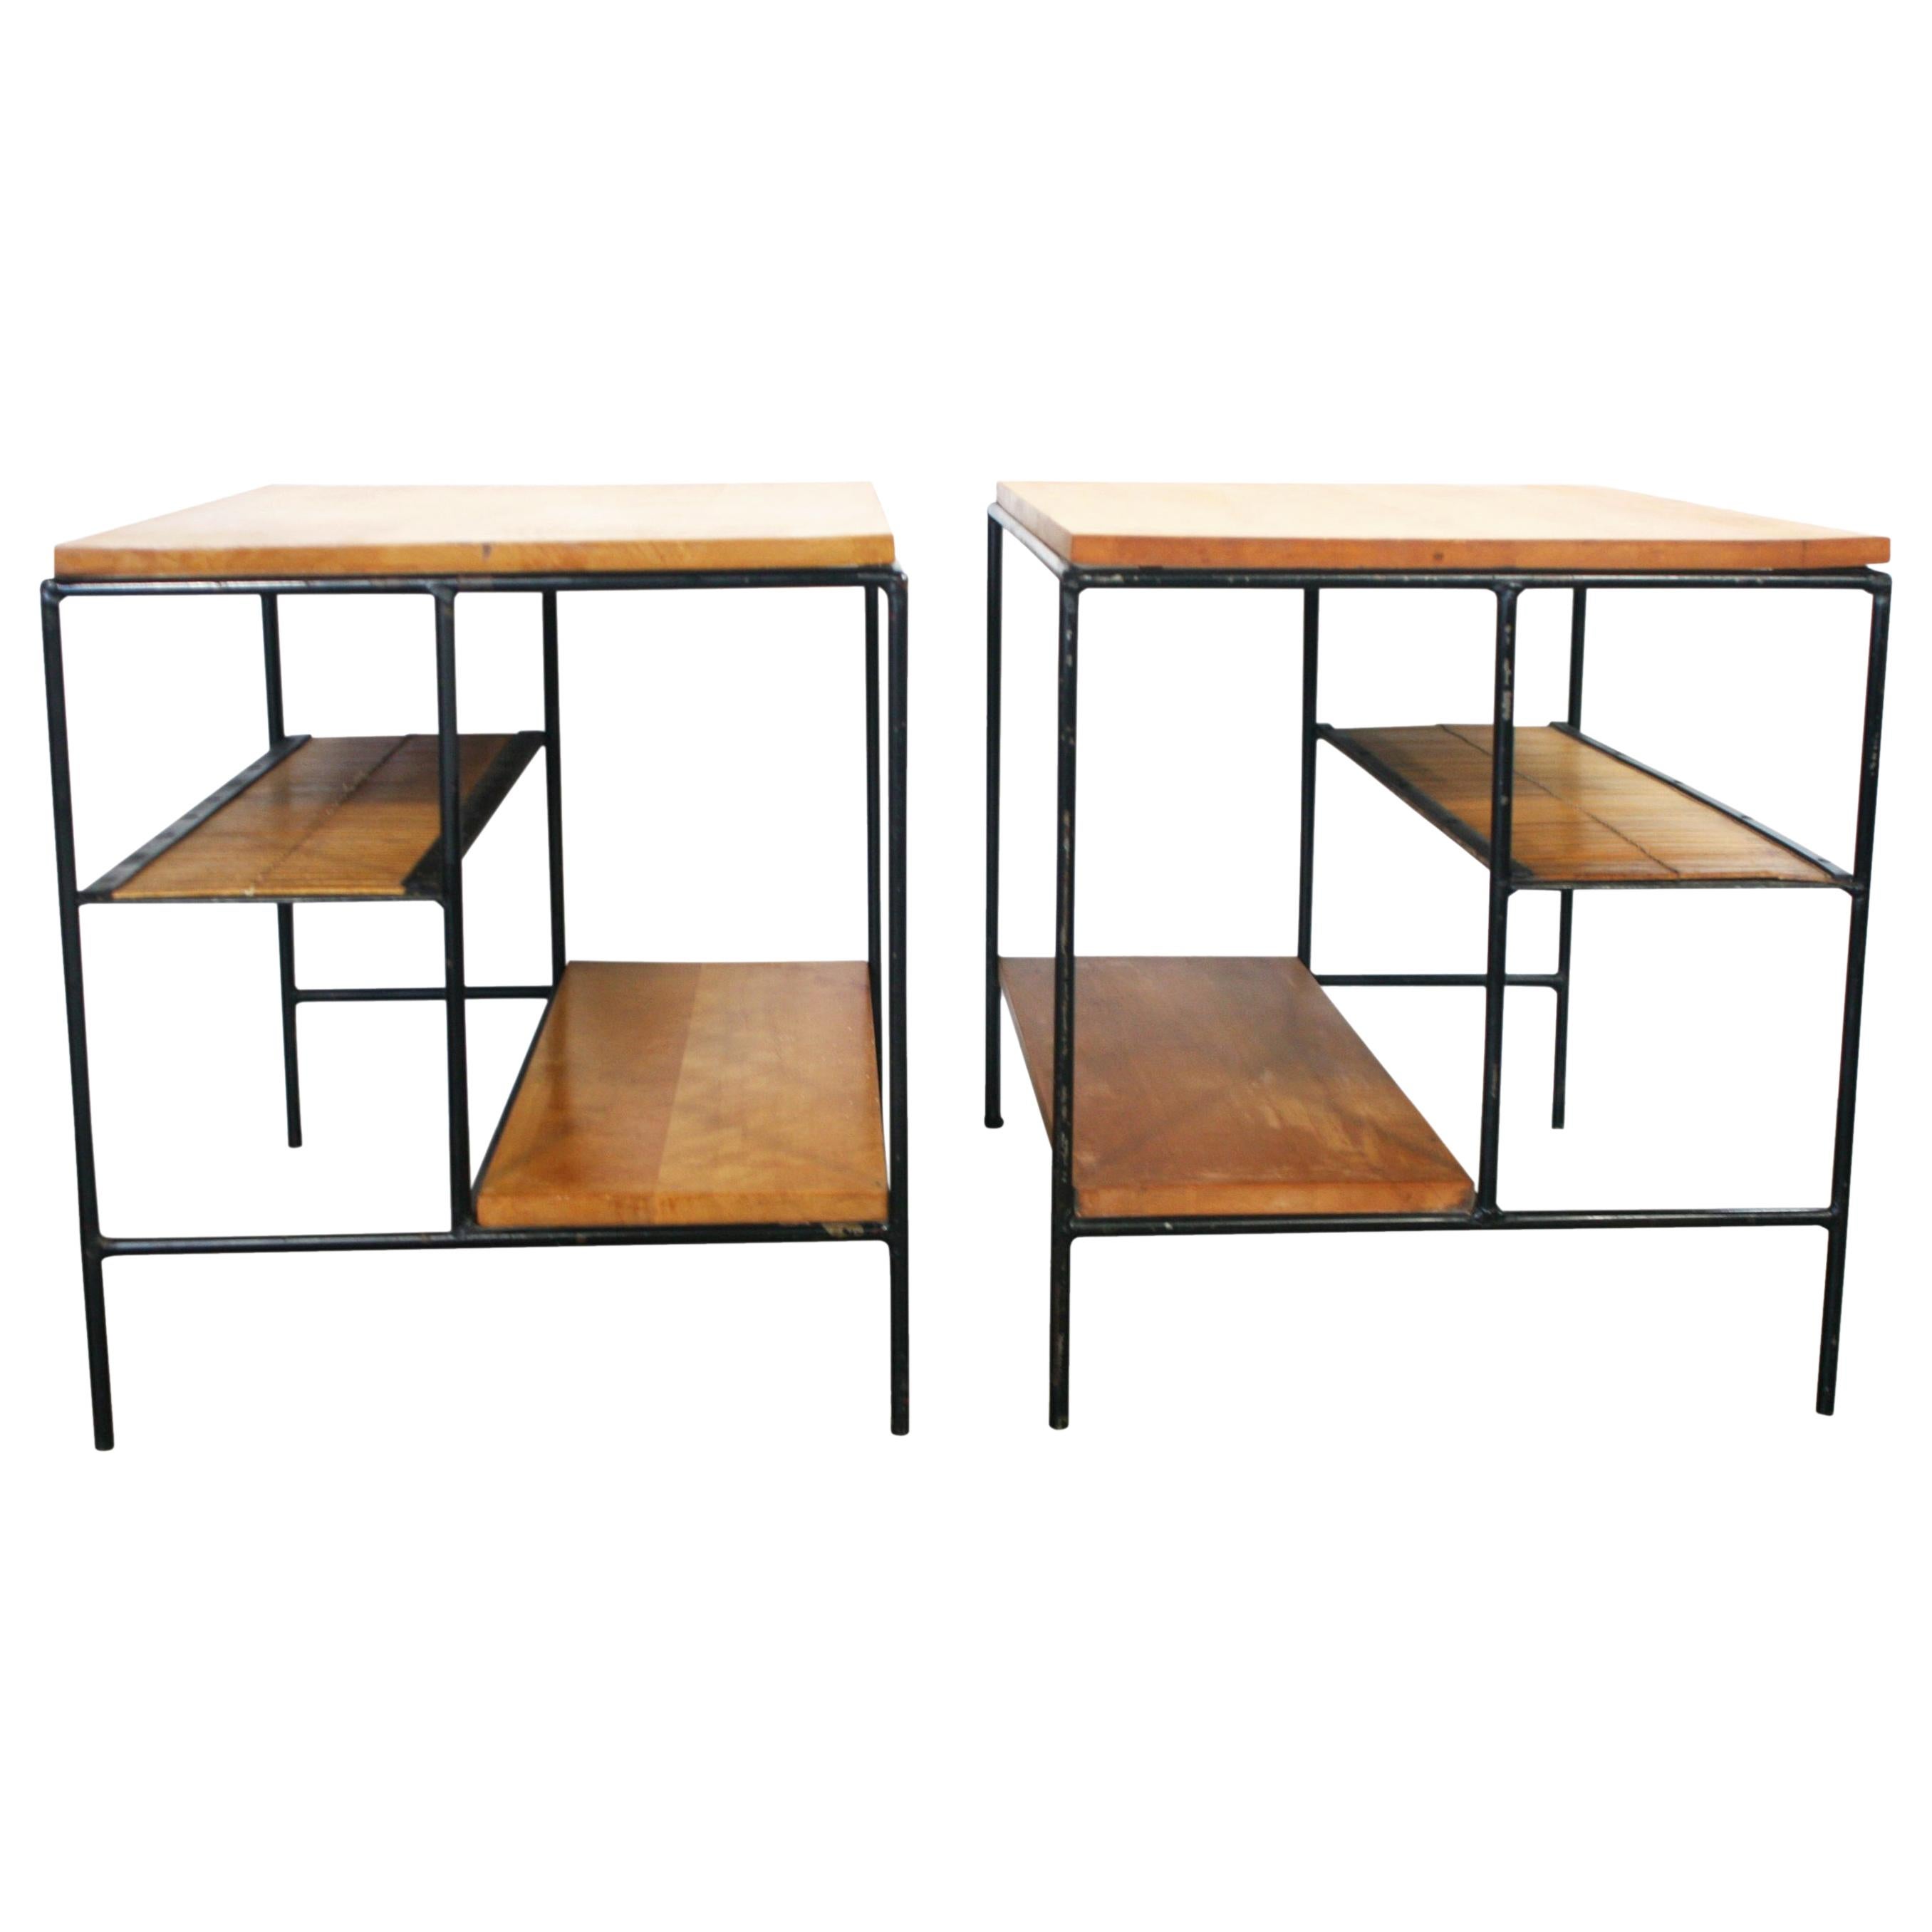 Midcentury Paul McCobb Pair of Planner Group End Side Tables #1578 Maple Iron